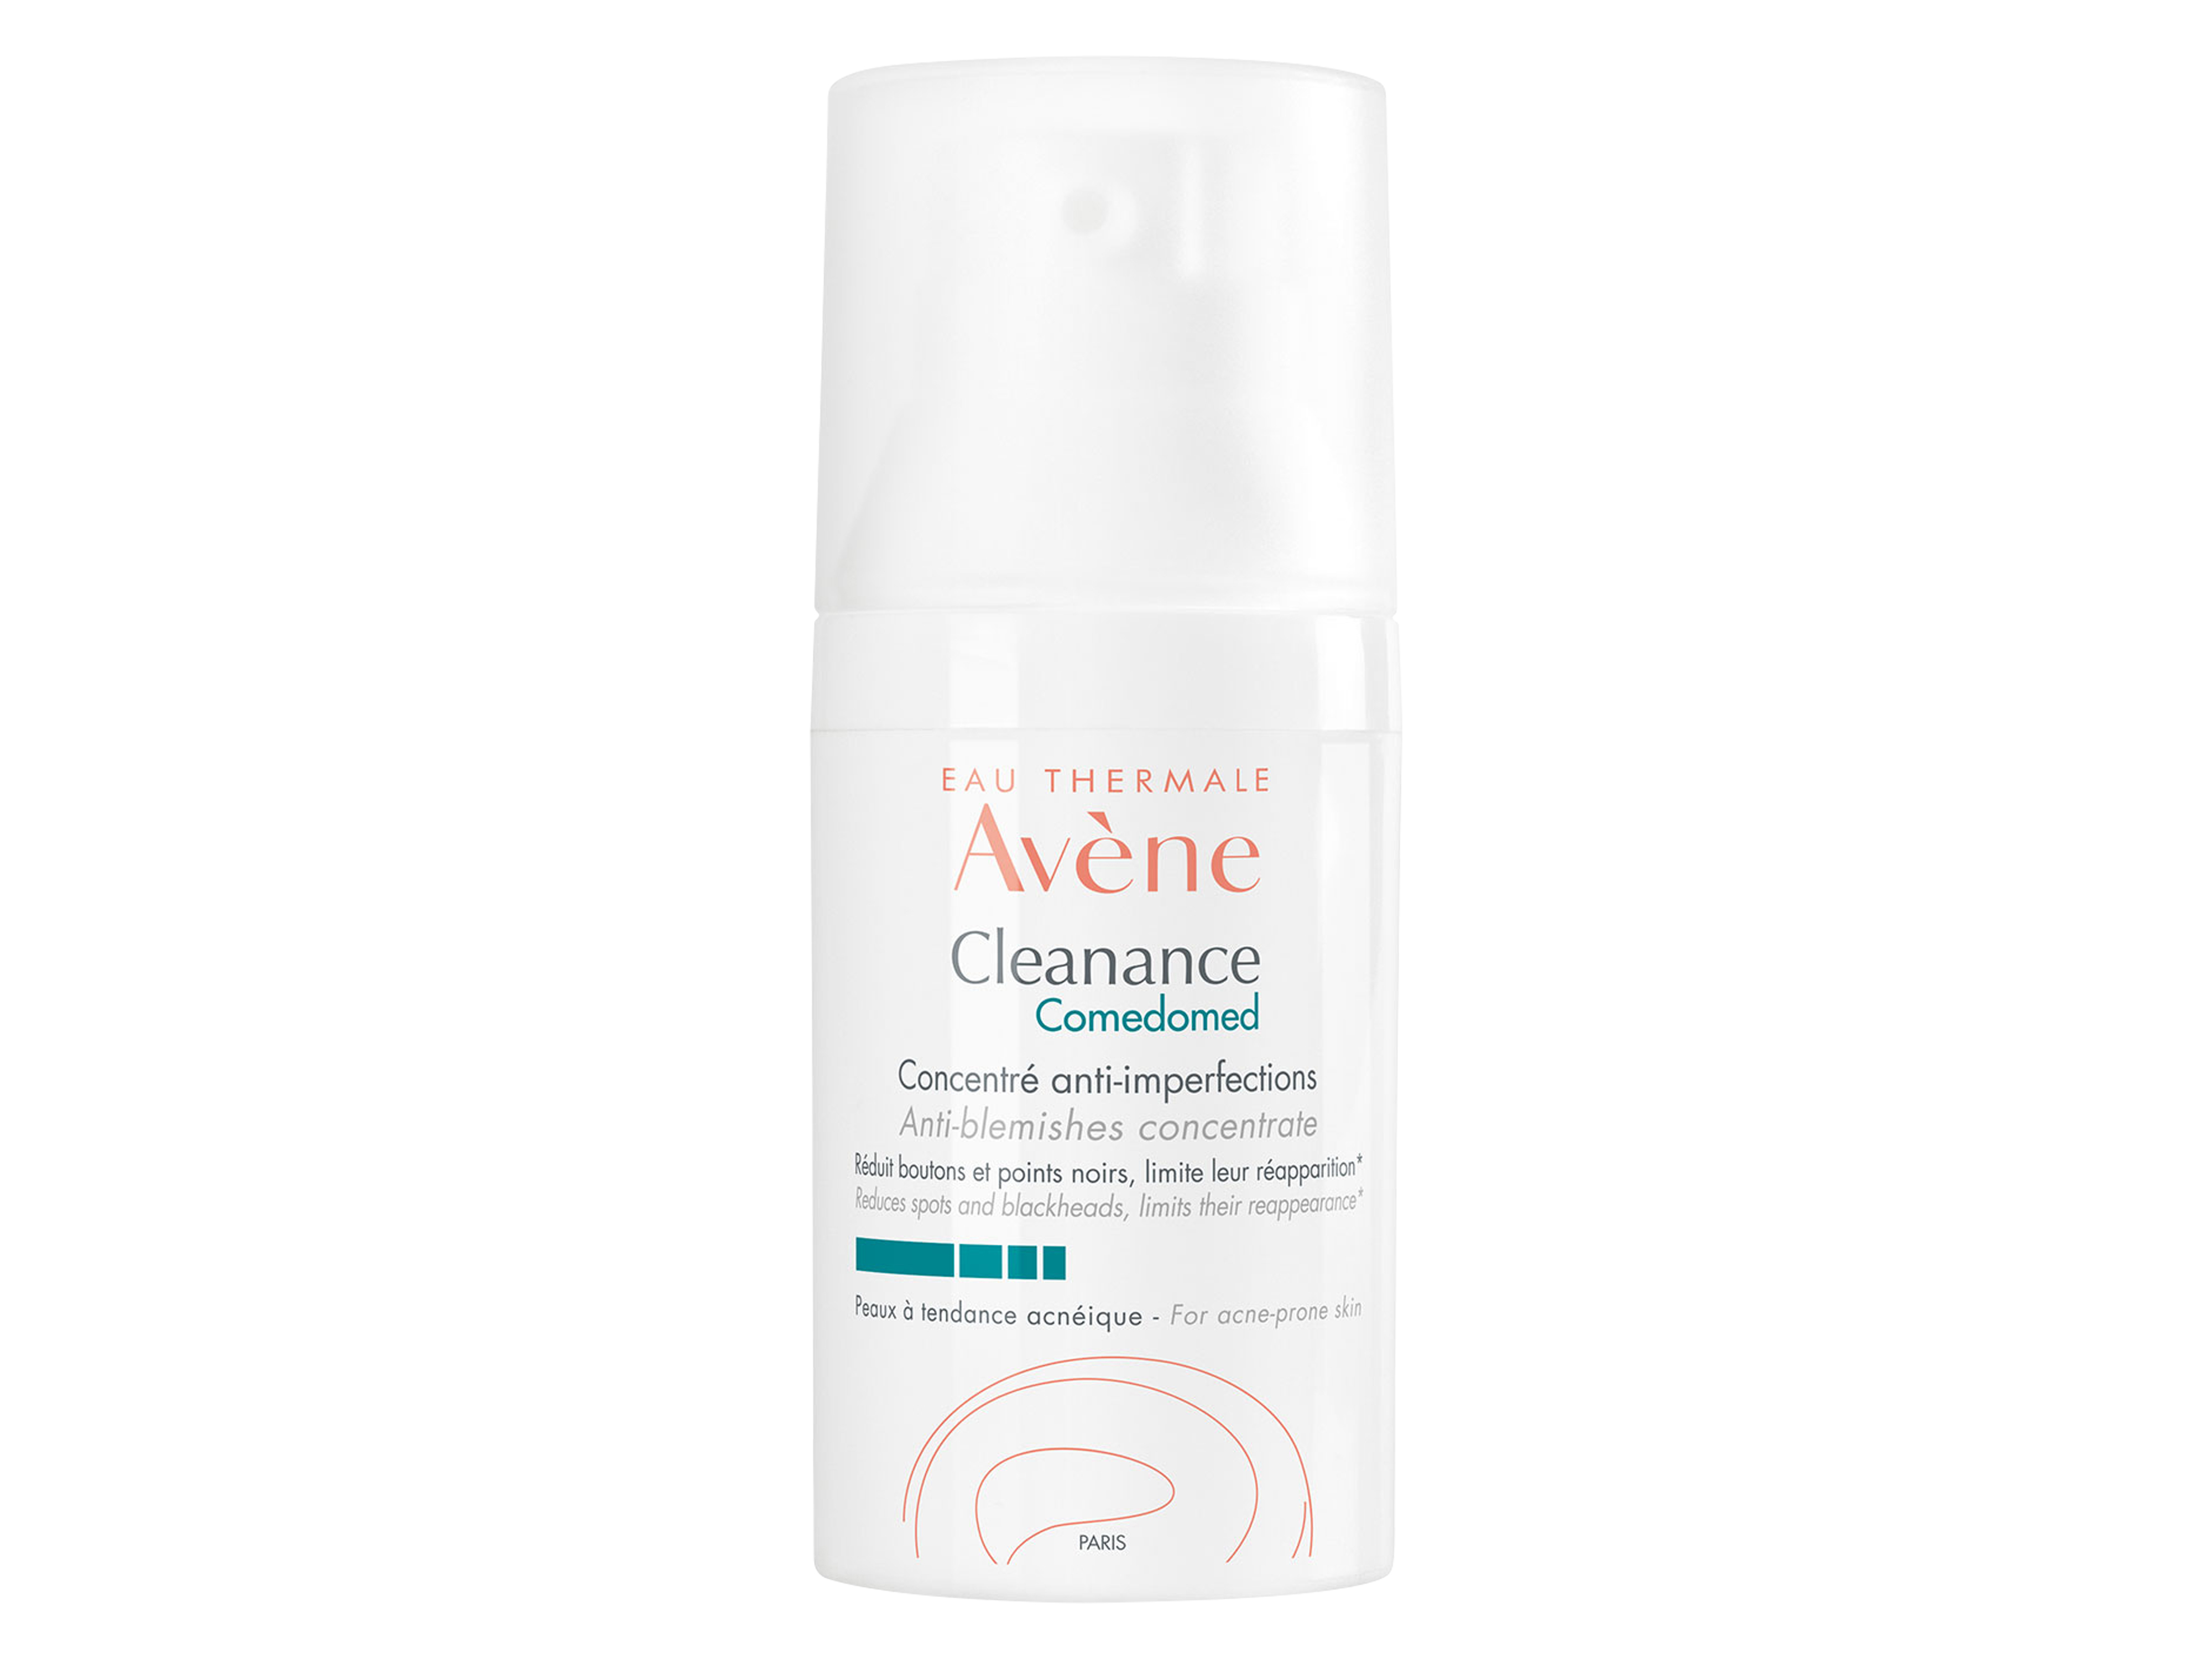 Avène Cleanance Comedomed Anti-blemishes Concentrate, 30 ml